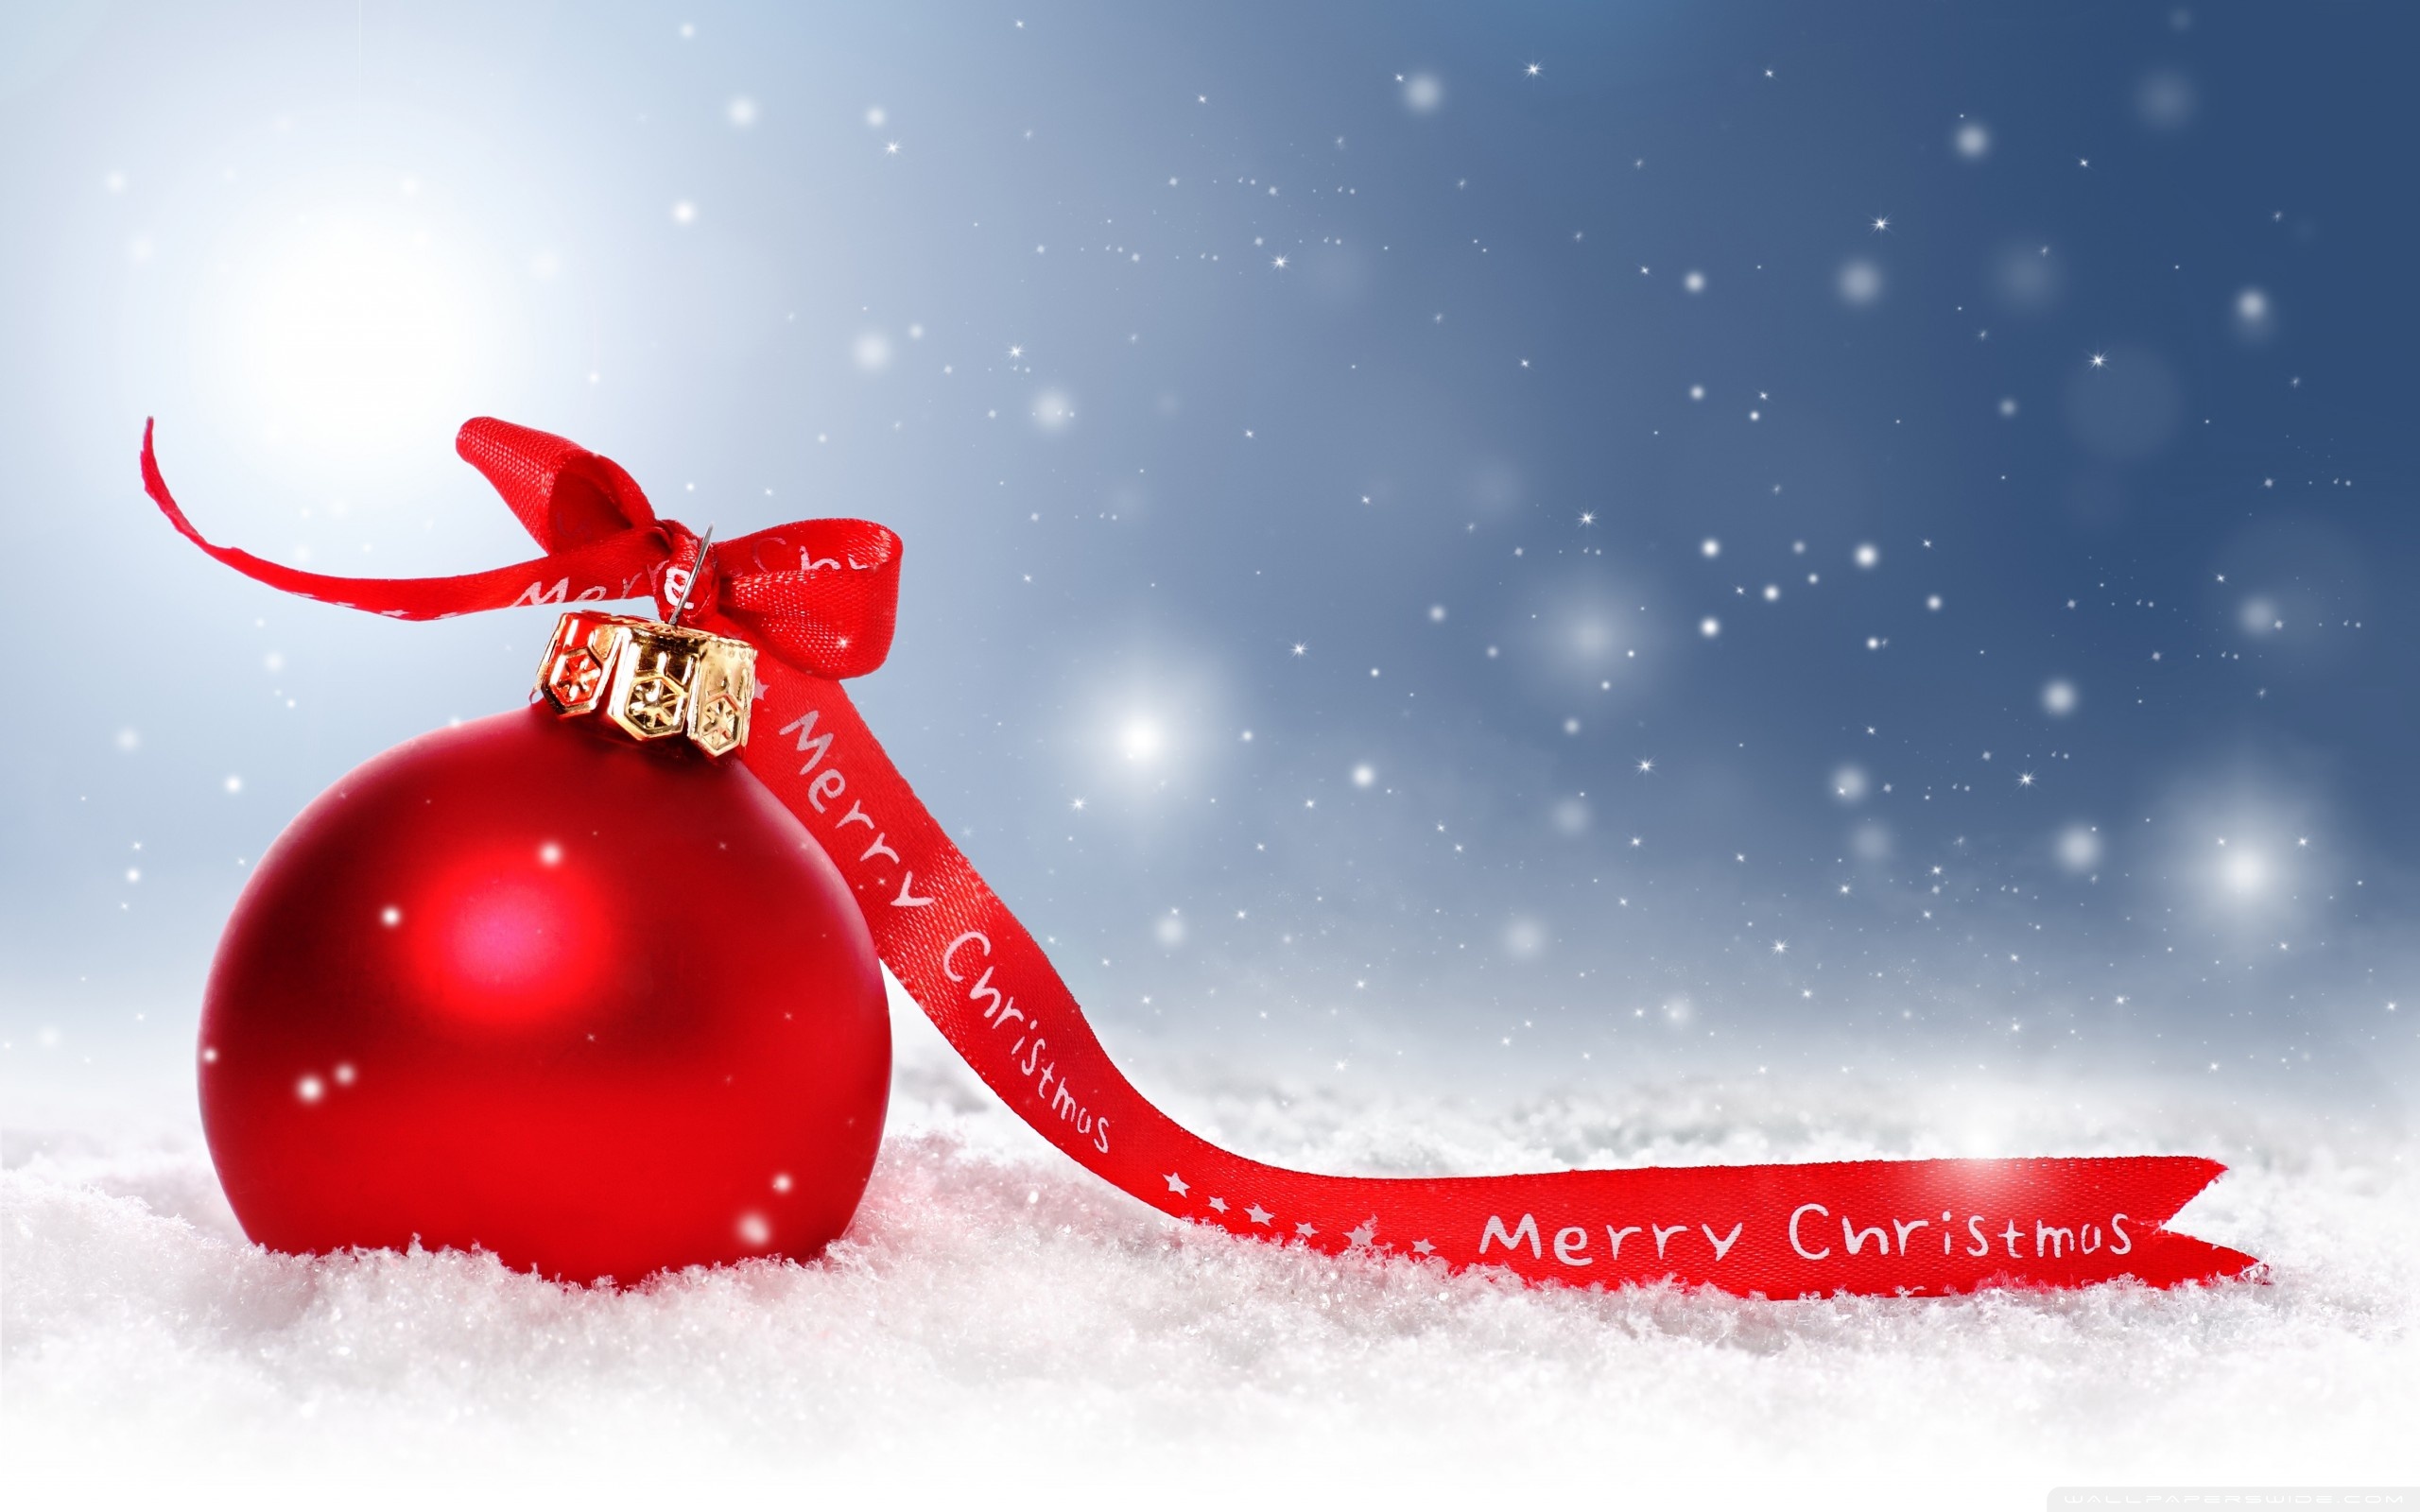 Buon Natale Messages.Merry Christmas Buon Natale Clip Art Library